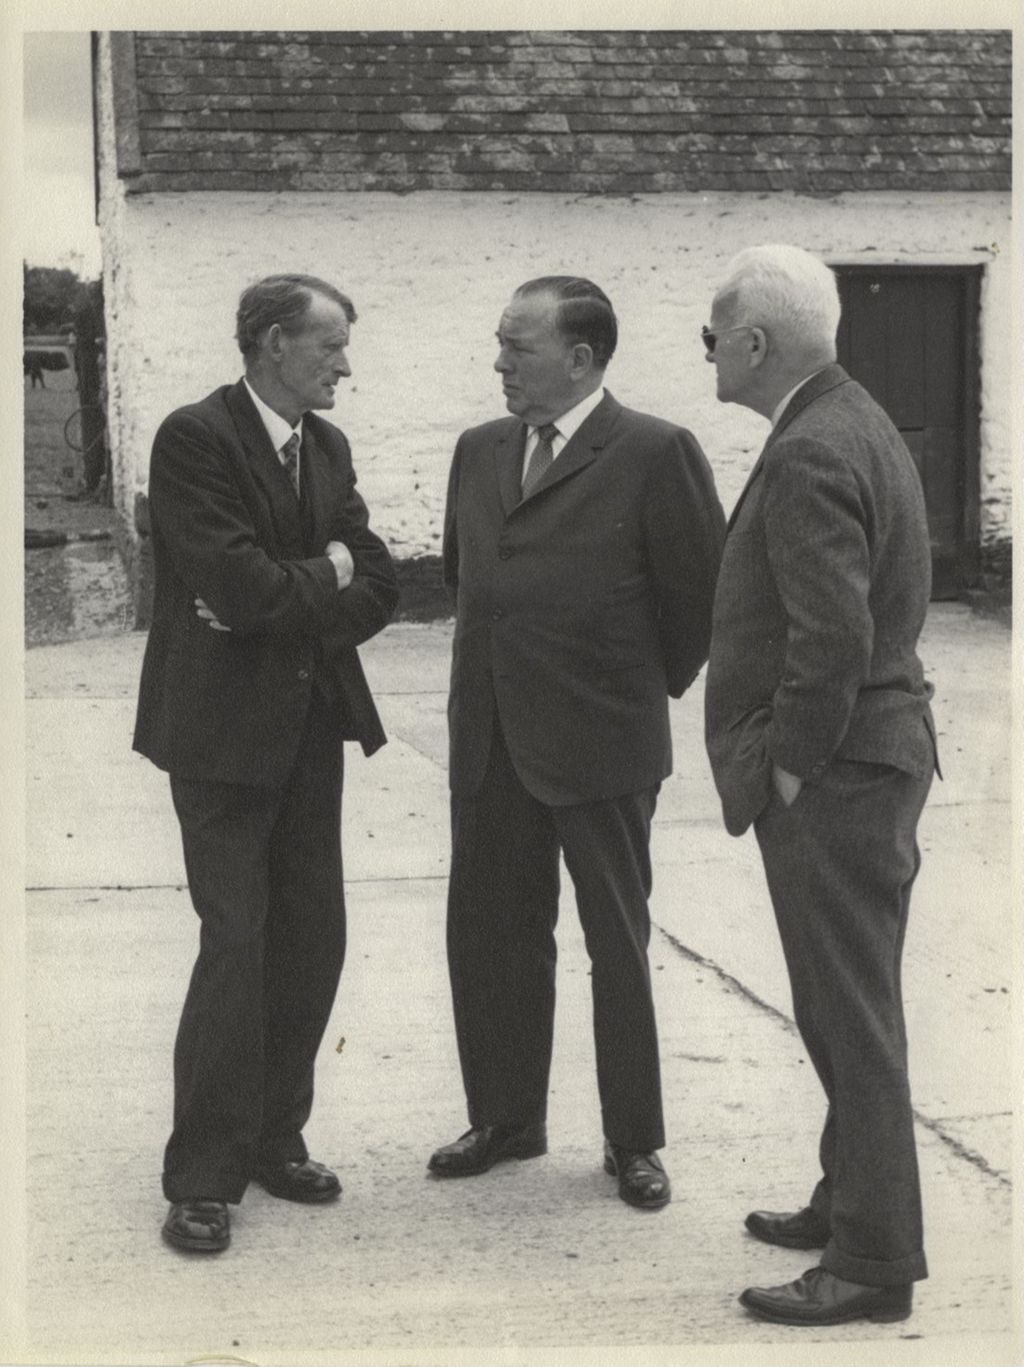 Trip to Ireland, Richard J. Daley and Colonel Jack Reilly with a Kennedy relative